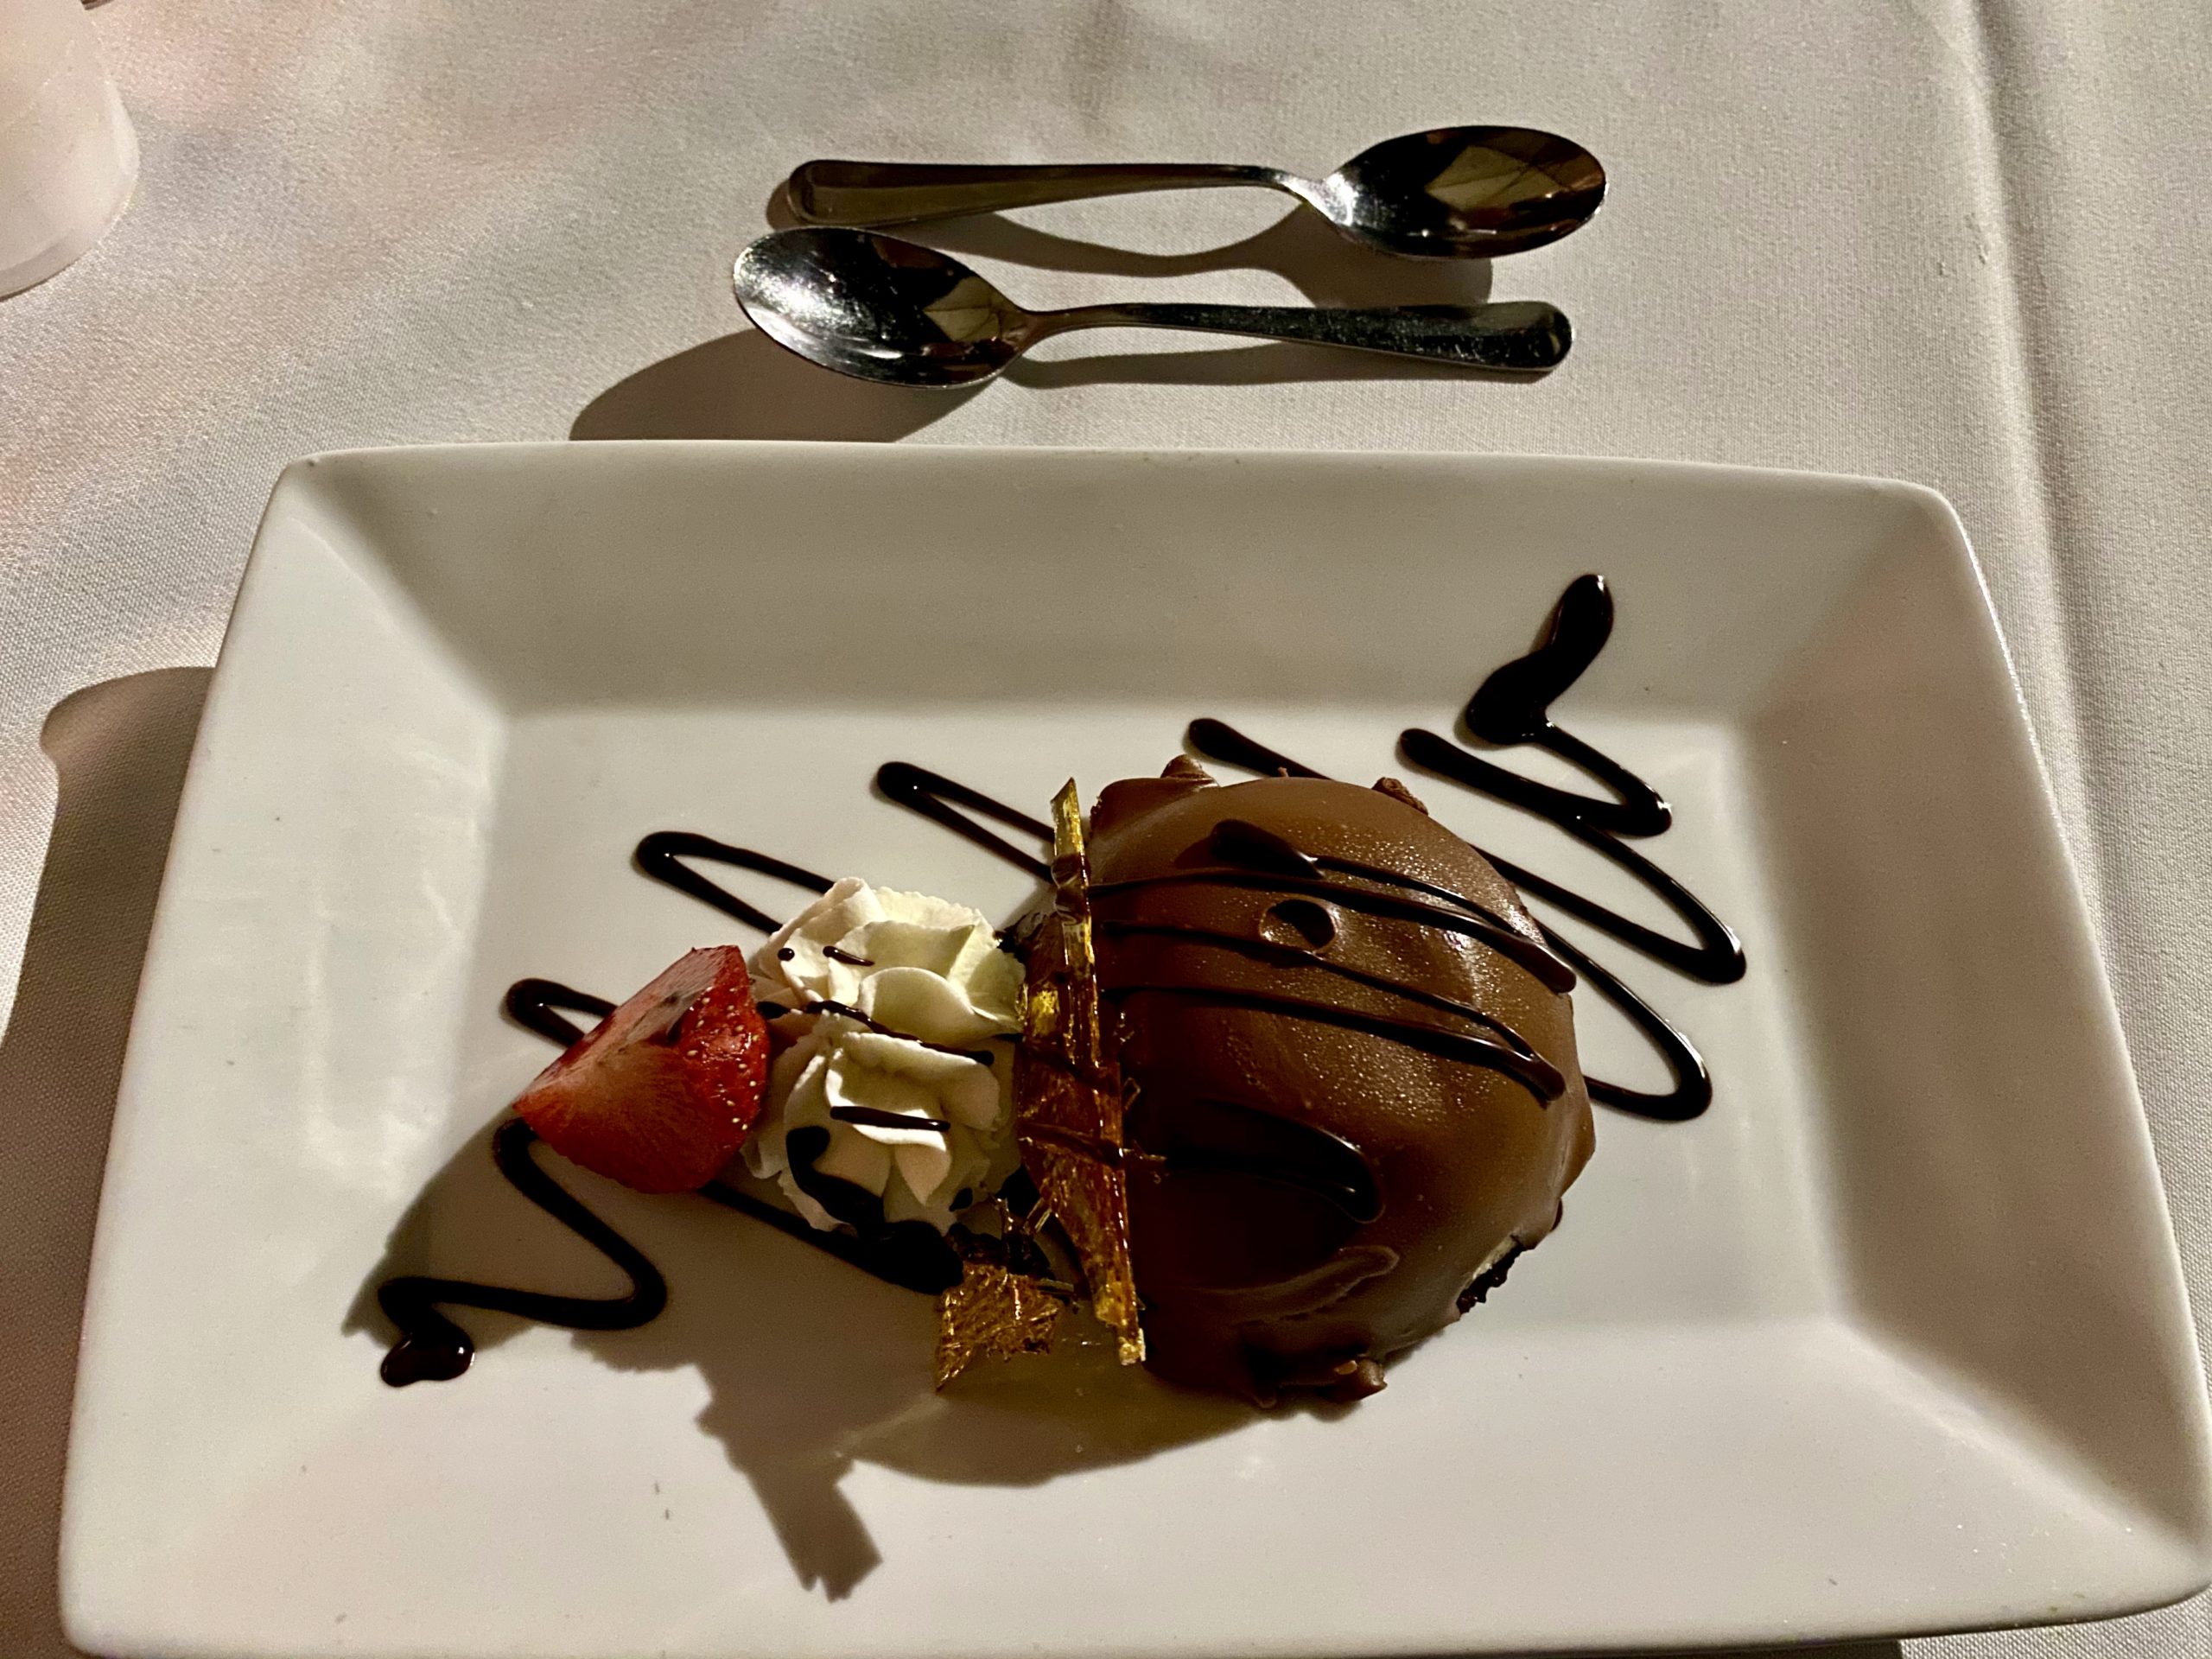 a plate of dessert with a spoon and a spoon